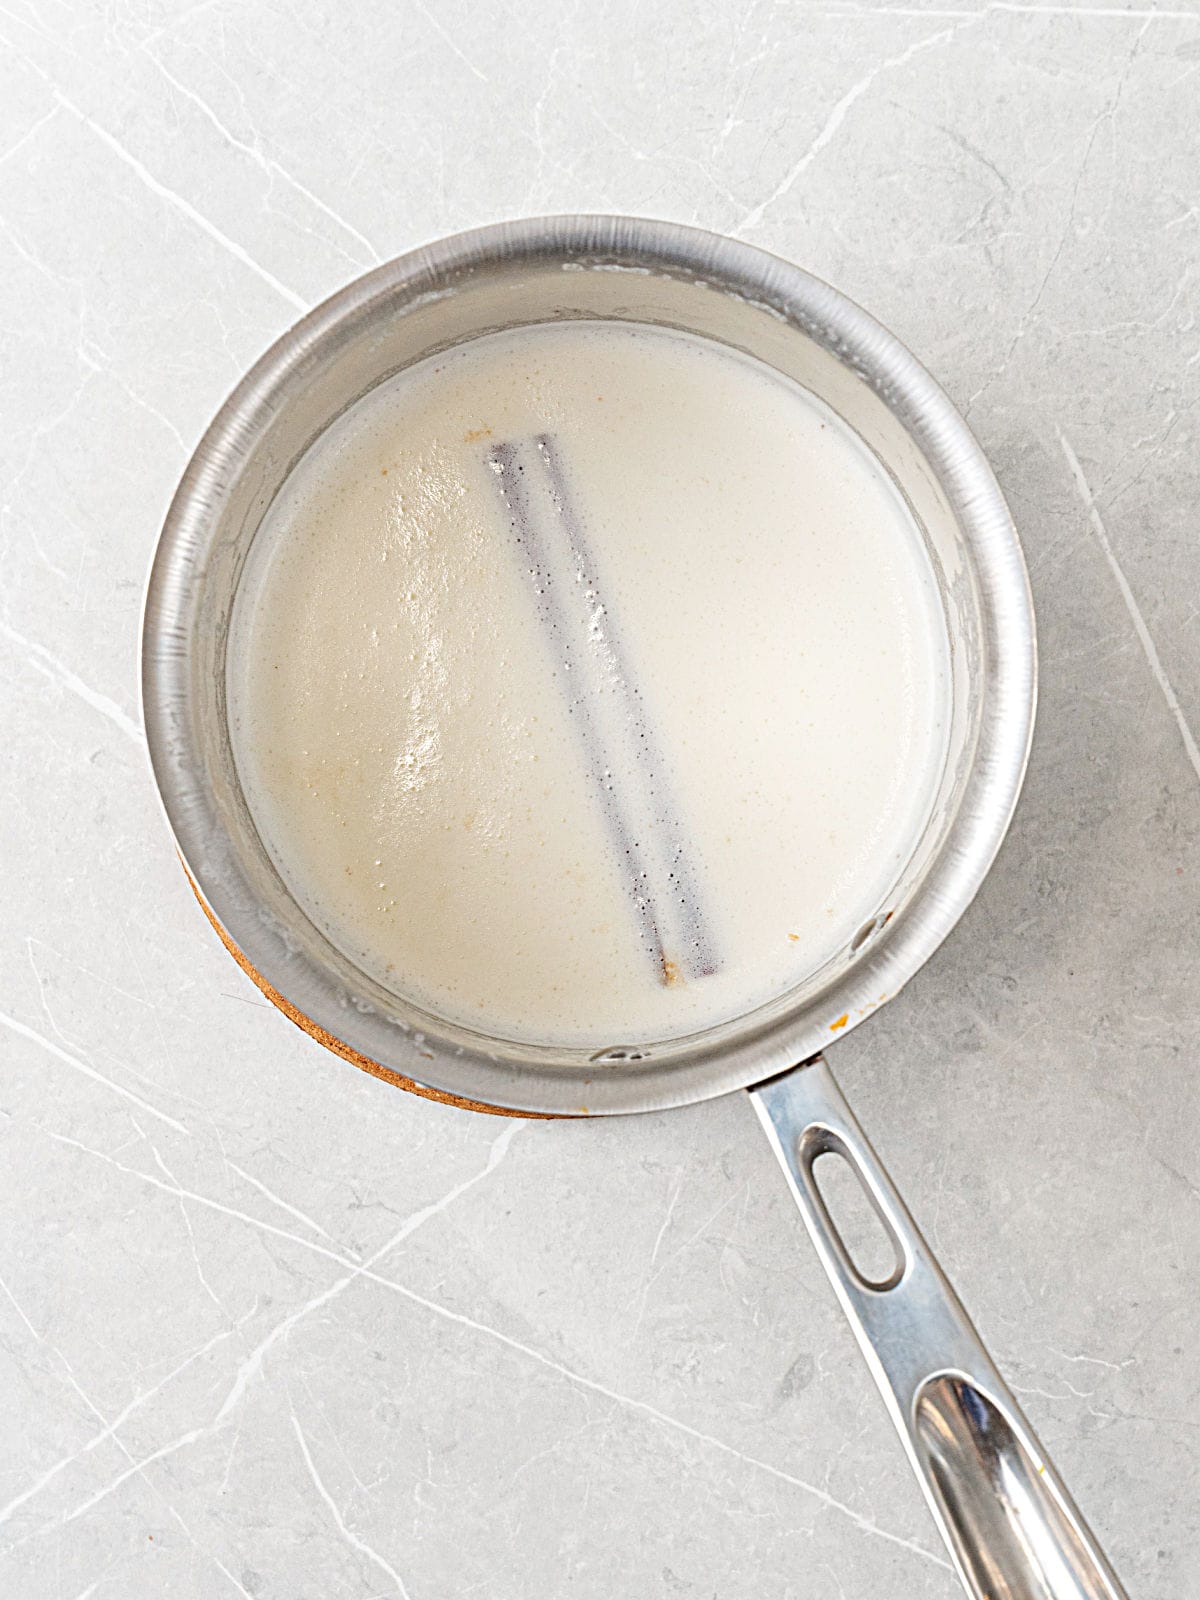 Saucepan with simmering milk with cinnamon stick. Light gray surface.